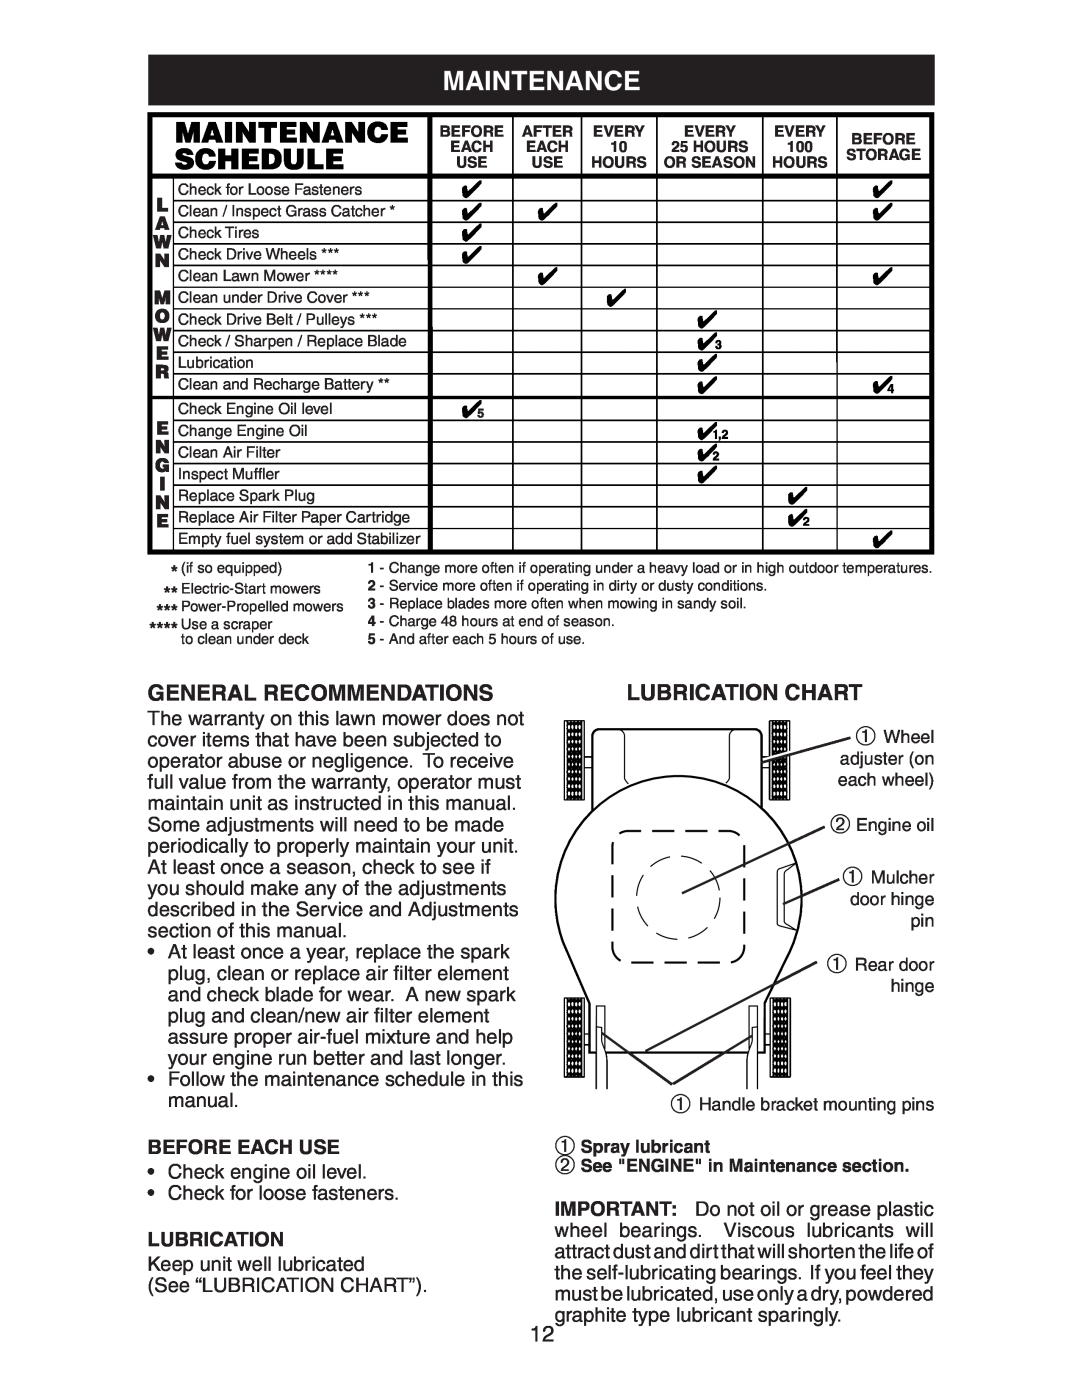 Husqvarna 917.37583 owner manual Maintenance, General Recommendations, Lubrication Chart 